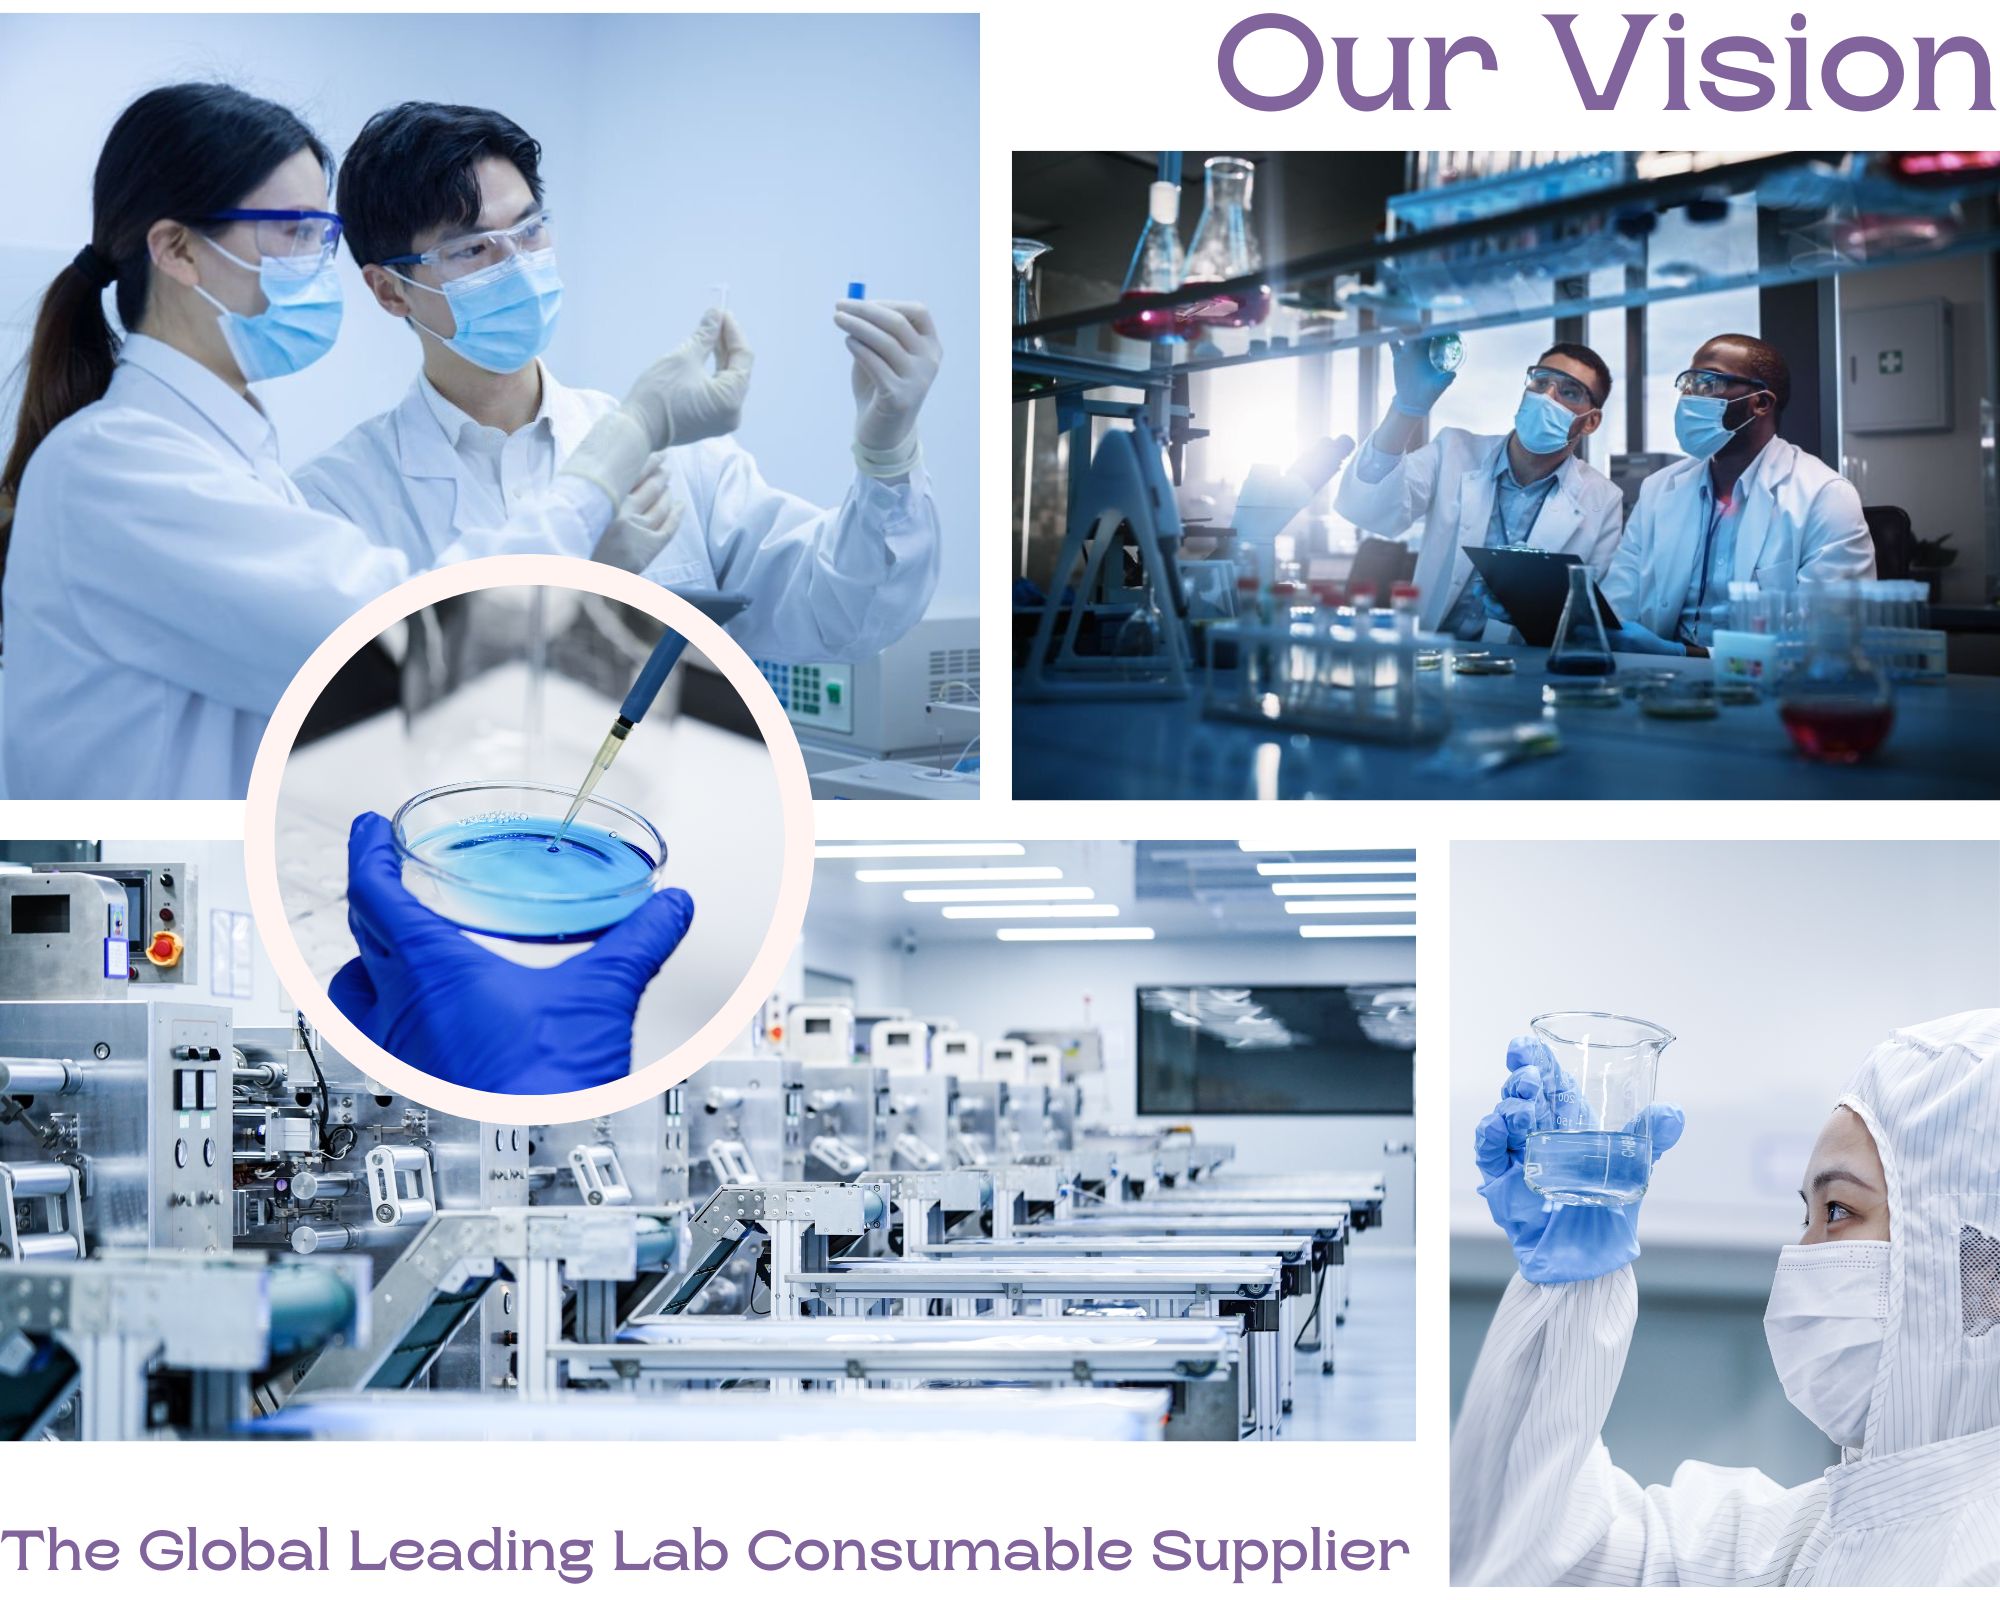 Mantacc vision is to be 'The Global Leading Lab Consumable Supplier'.